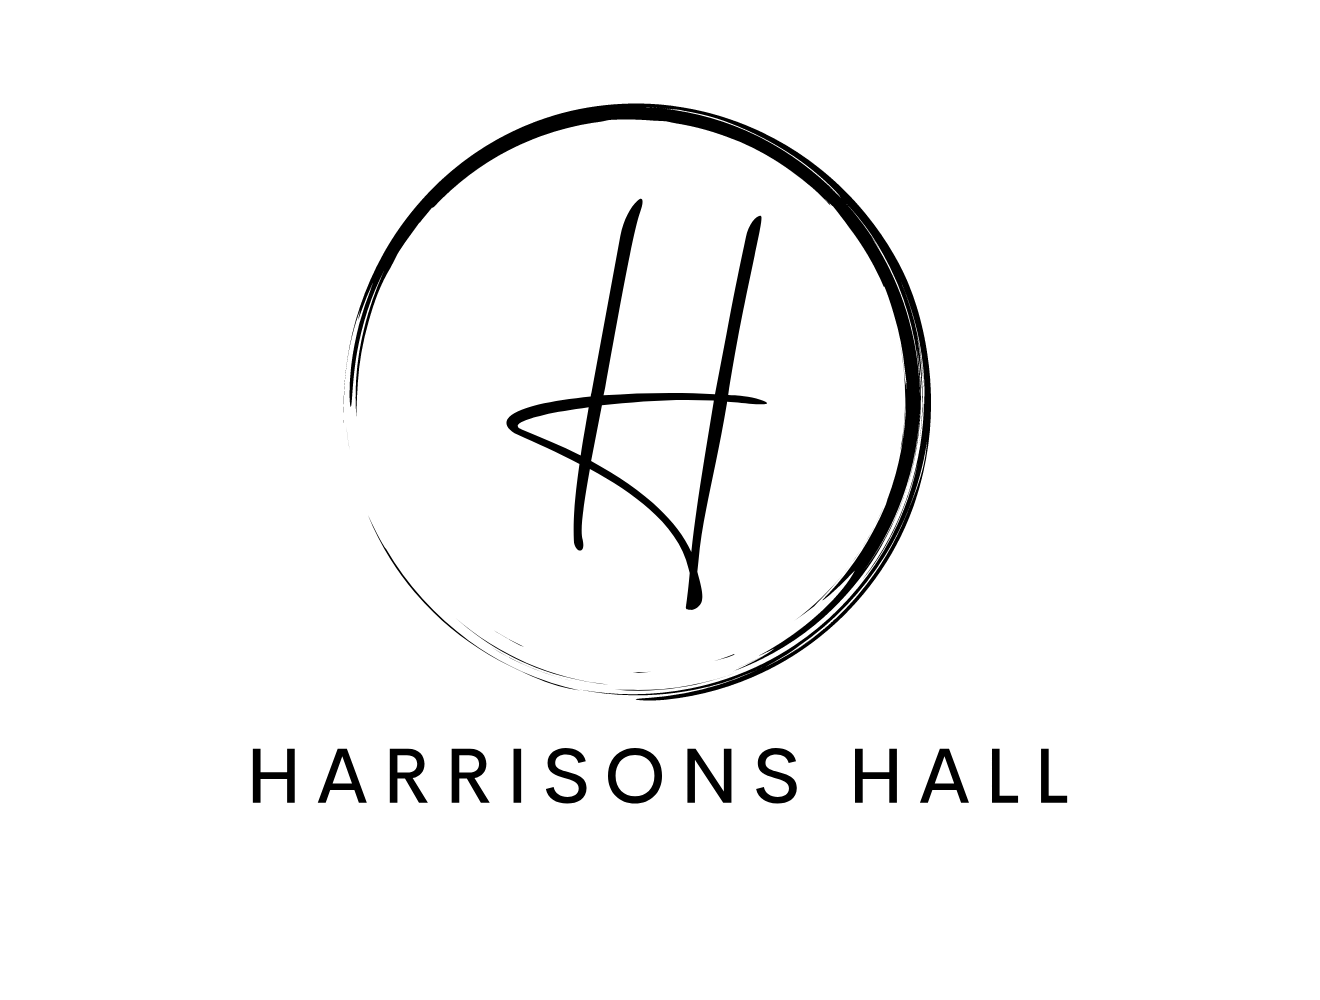 Image of Key Person Harrison